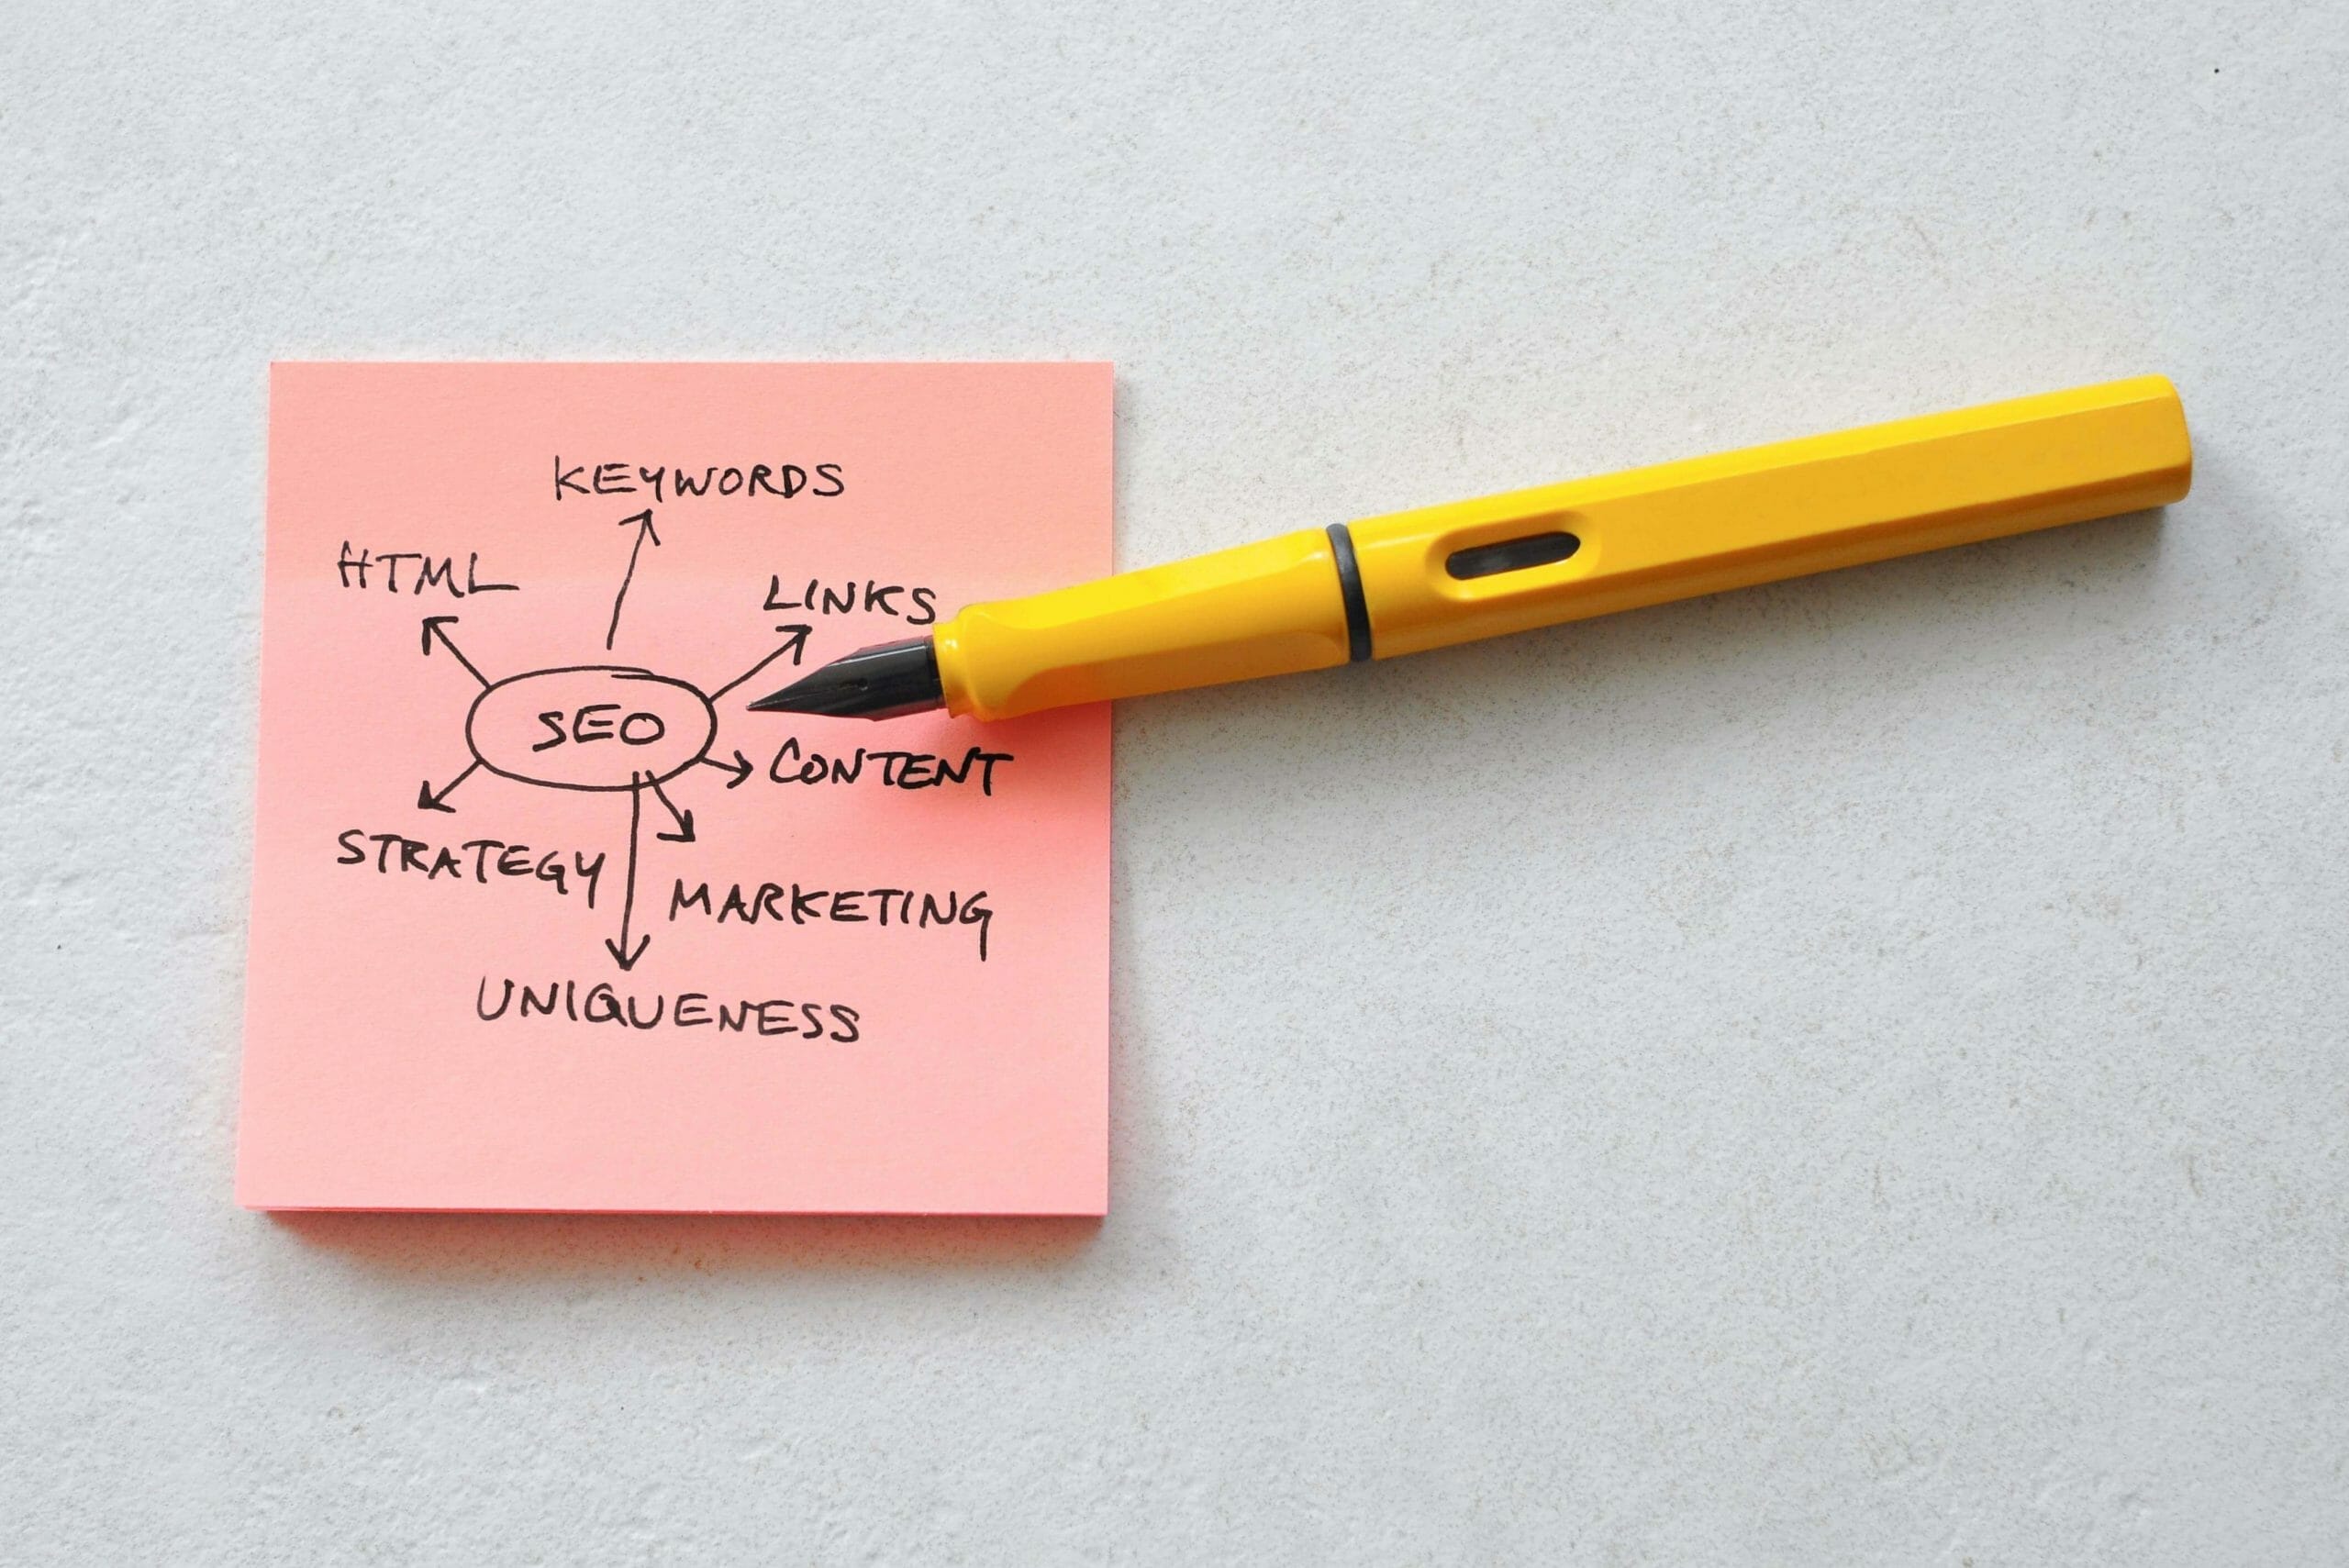 A pink postit note with a mind map for SEO (search engine optimization), pointing out to HTML, keywords, links, content, marketing, uniqueness, and strategy for website optimization services.